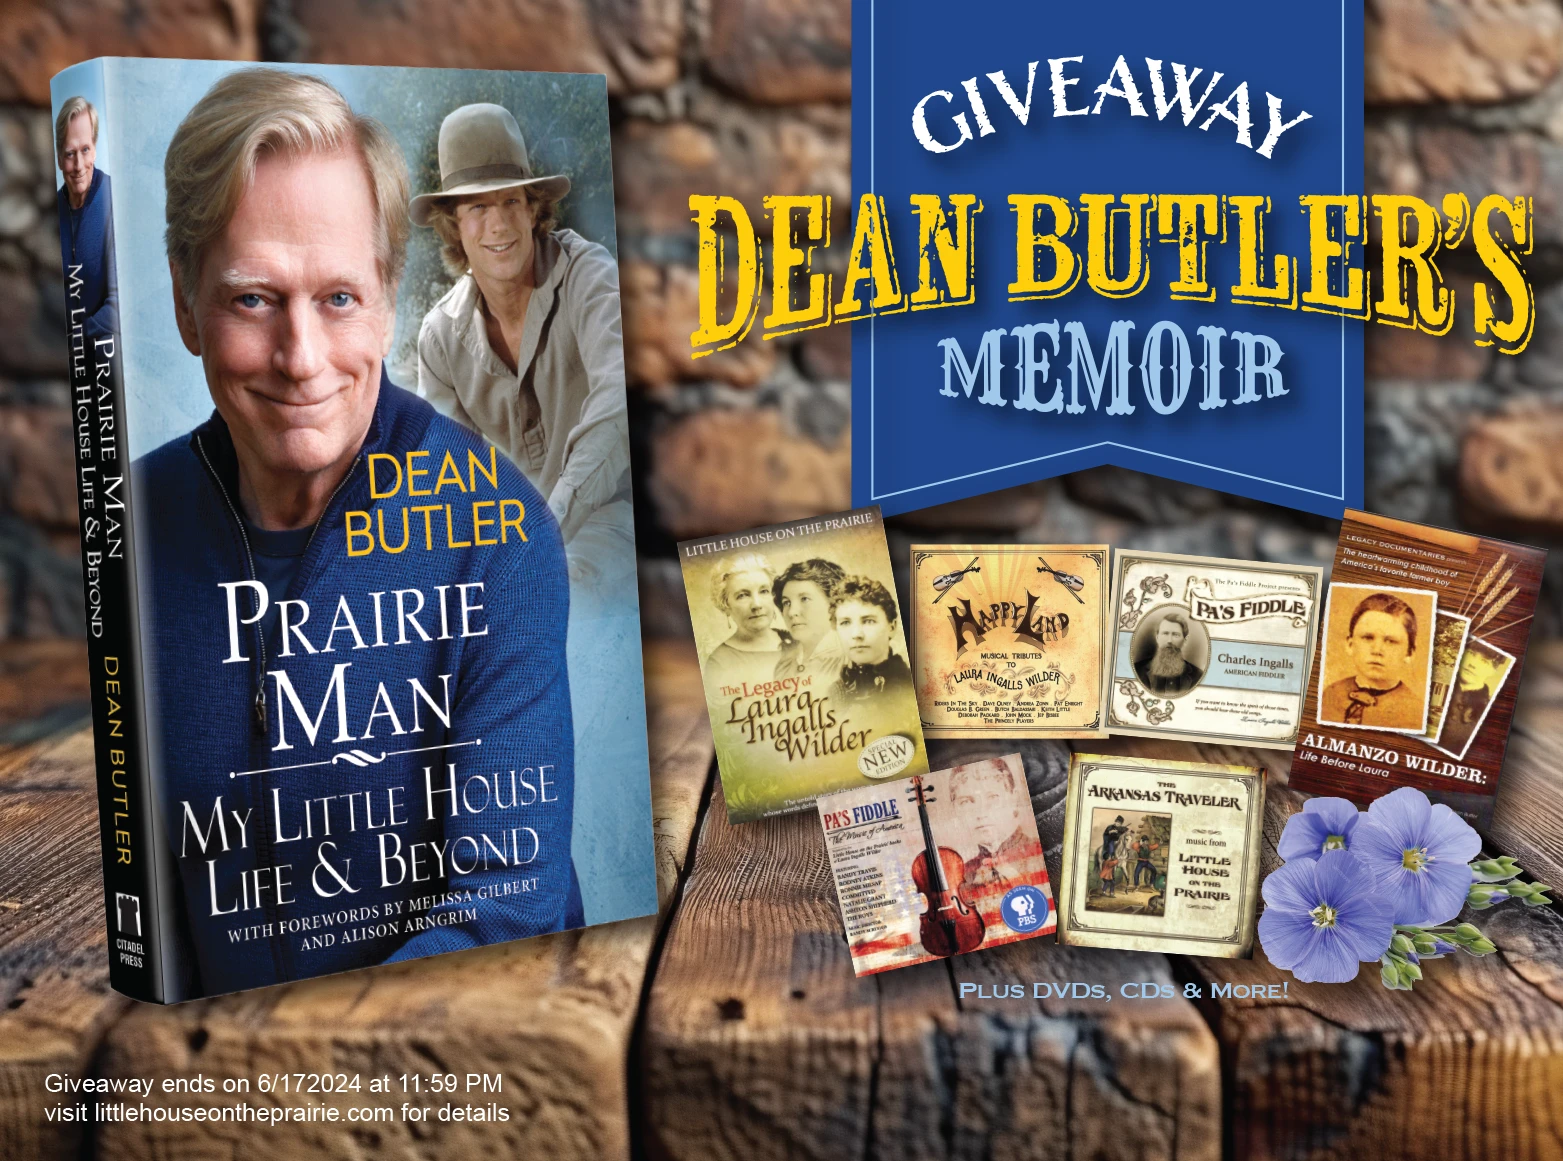 Dean Butler Inspired Little House on the Prairie 50th Anniversary Giveaway